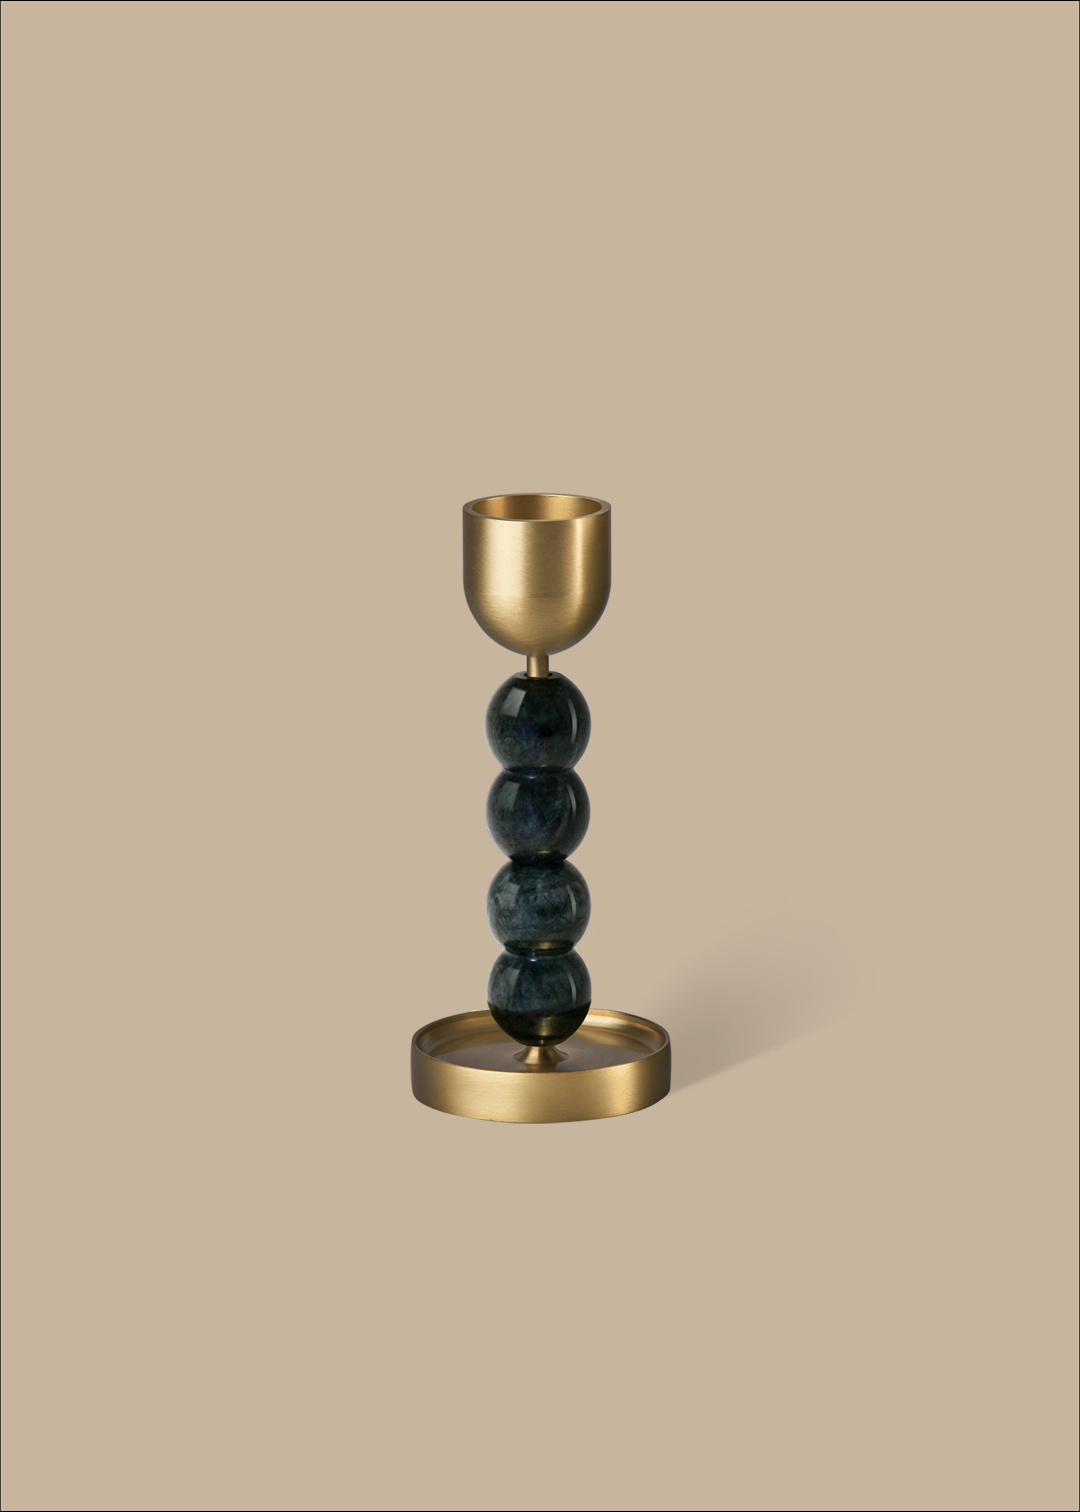 GOURD-GEOUS Candle Holder - L Dark Green